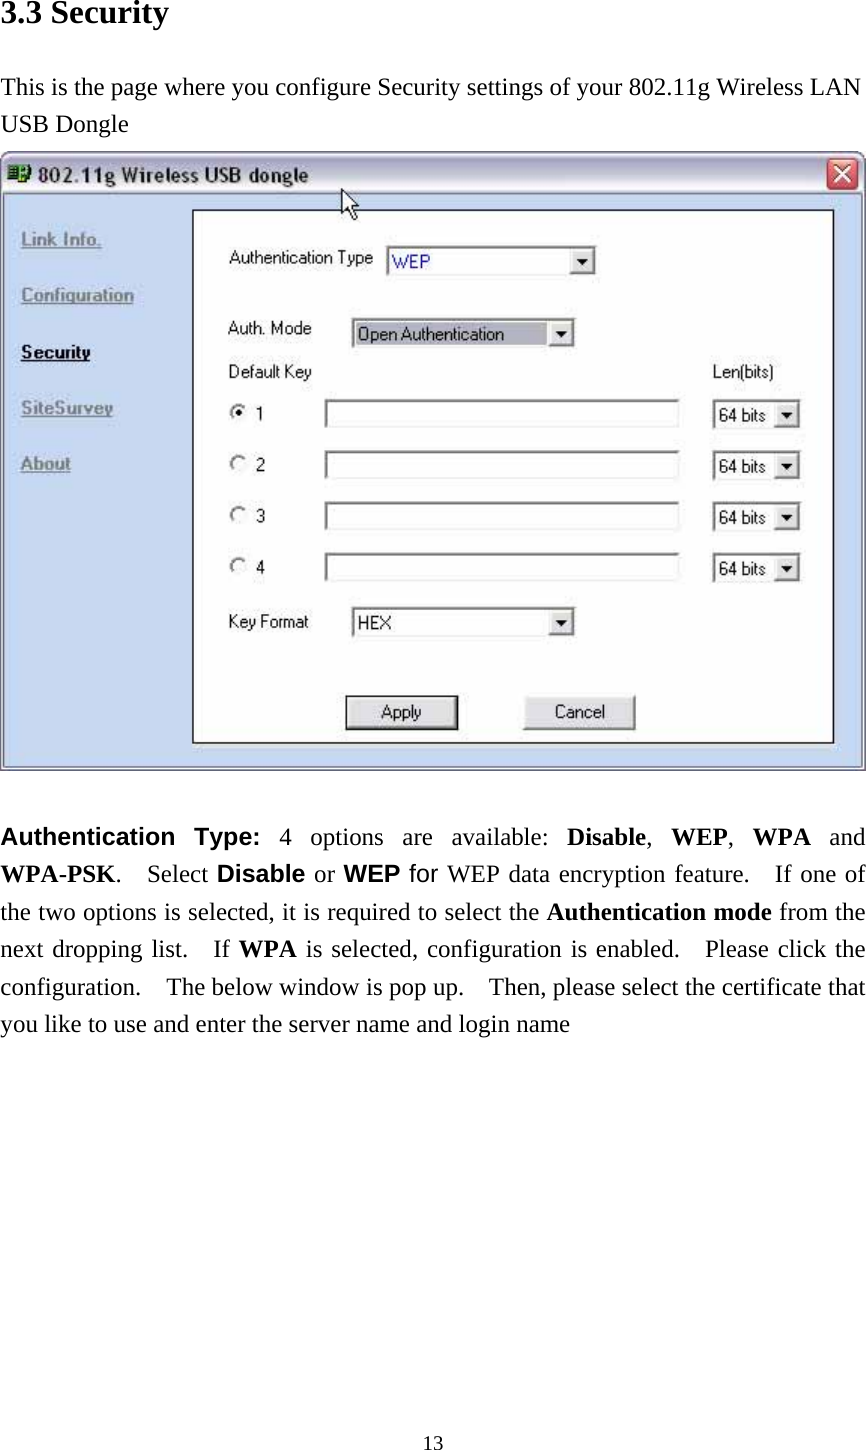  133.3 Security This is the page where you configure Security settings of your 802.11g Wireless LAN USB Dongle   Authentication Type: 4 options are available: Disable,  WEP,  WPA and WPA-PSK.  Select Disable or WEP for WEP data encryption feature.   If one of the two options is selected, it is required to select the Authentication mode from the next dropping list.  If WPA is selected, configuration is enabled.  Please click the configuration.    The below window is pop up.    Then, please select the certificate that you like to use and enter the server name and login name 